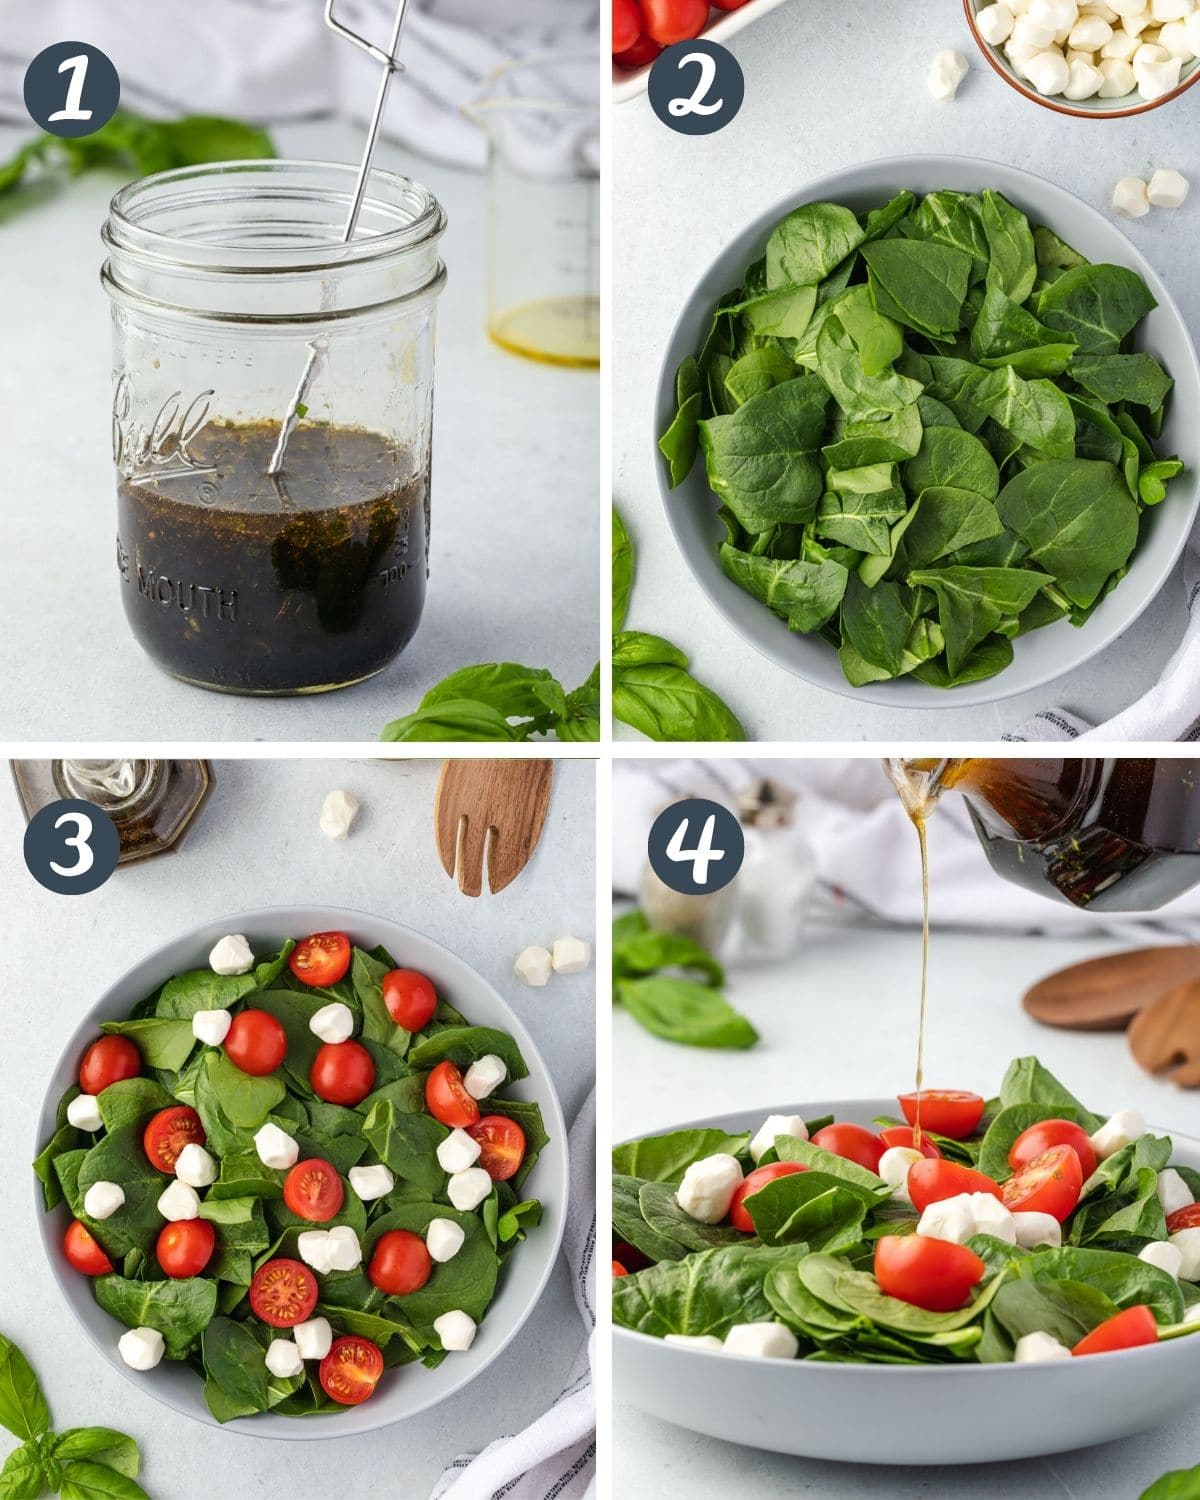 Collage of the 4 steps to make salad: dressing, bowl of spinach, toppings added, and pouring dressing over salad.